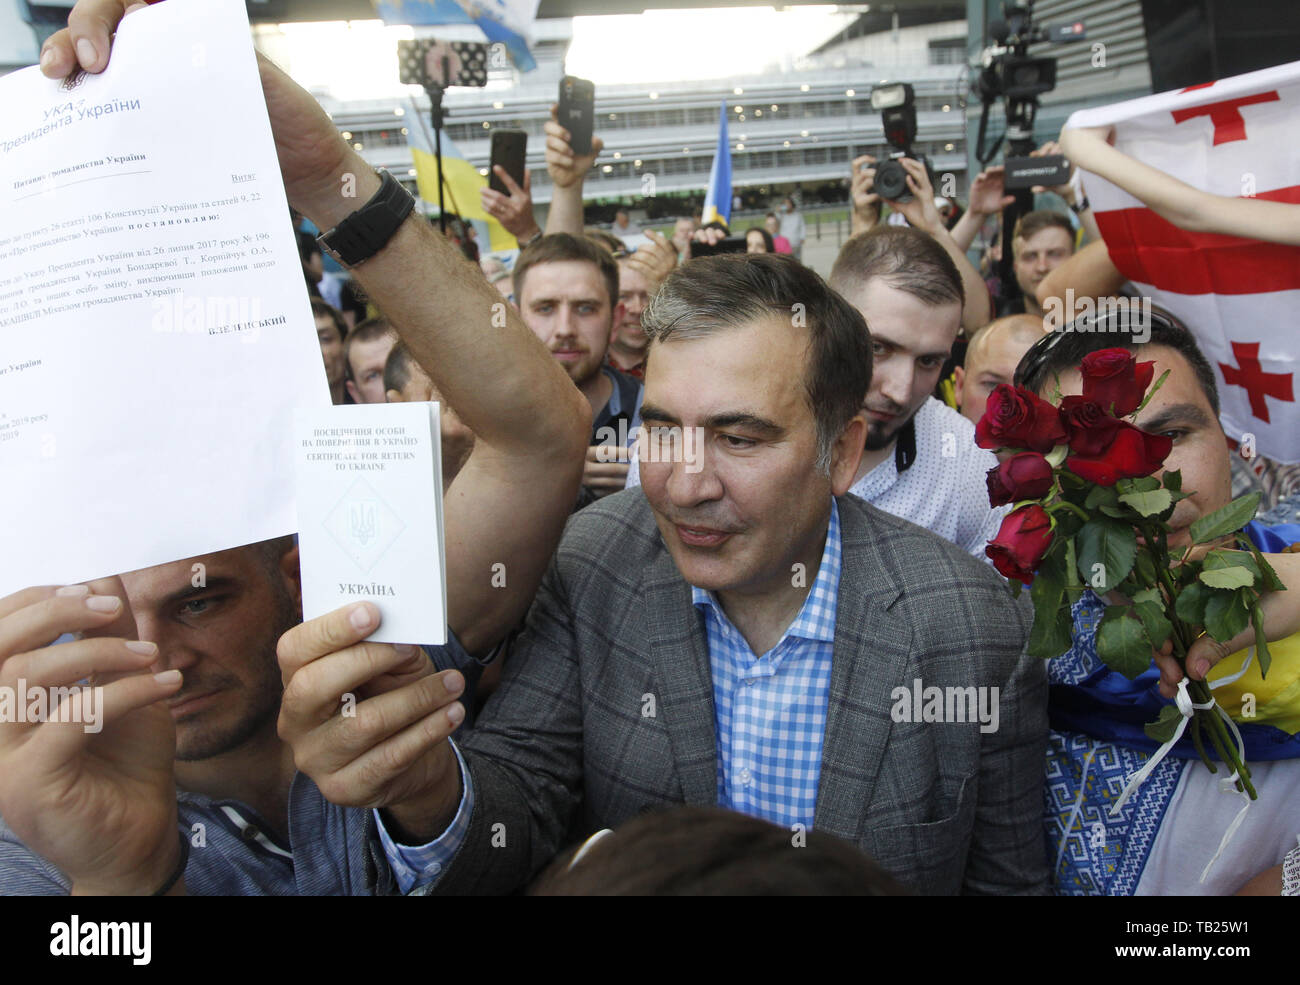 May 29, 2019 - Kiev, Ukraine - Former Georgian president and ex-Odessa Governor MIKHEIL SAAKASHVILI shows Certificate for returns to Ukraine and Presidential decree of about the return of his citizenship of Ukraine, as he arrives to the Boryspil international airport near Kiev, Ukraine, on 29 May 2019. Saakashvili returned to Ukraine after Ukrainian President Volodymyr Zelensky has reinstated Mikheil Saakashvili's Ukrainian citizenship on 28 May 2019. Zelensky deleted the respective provision from his predecessor Petro Poroshenko's No. 196 order dated July 26, 2017, the UNIAN inform agency rep Stock Photo